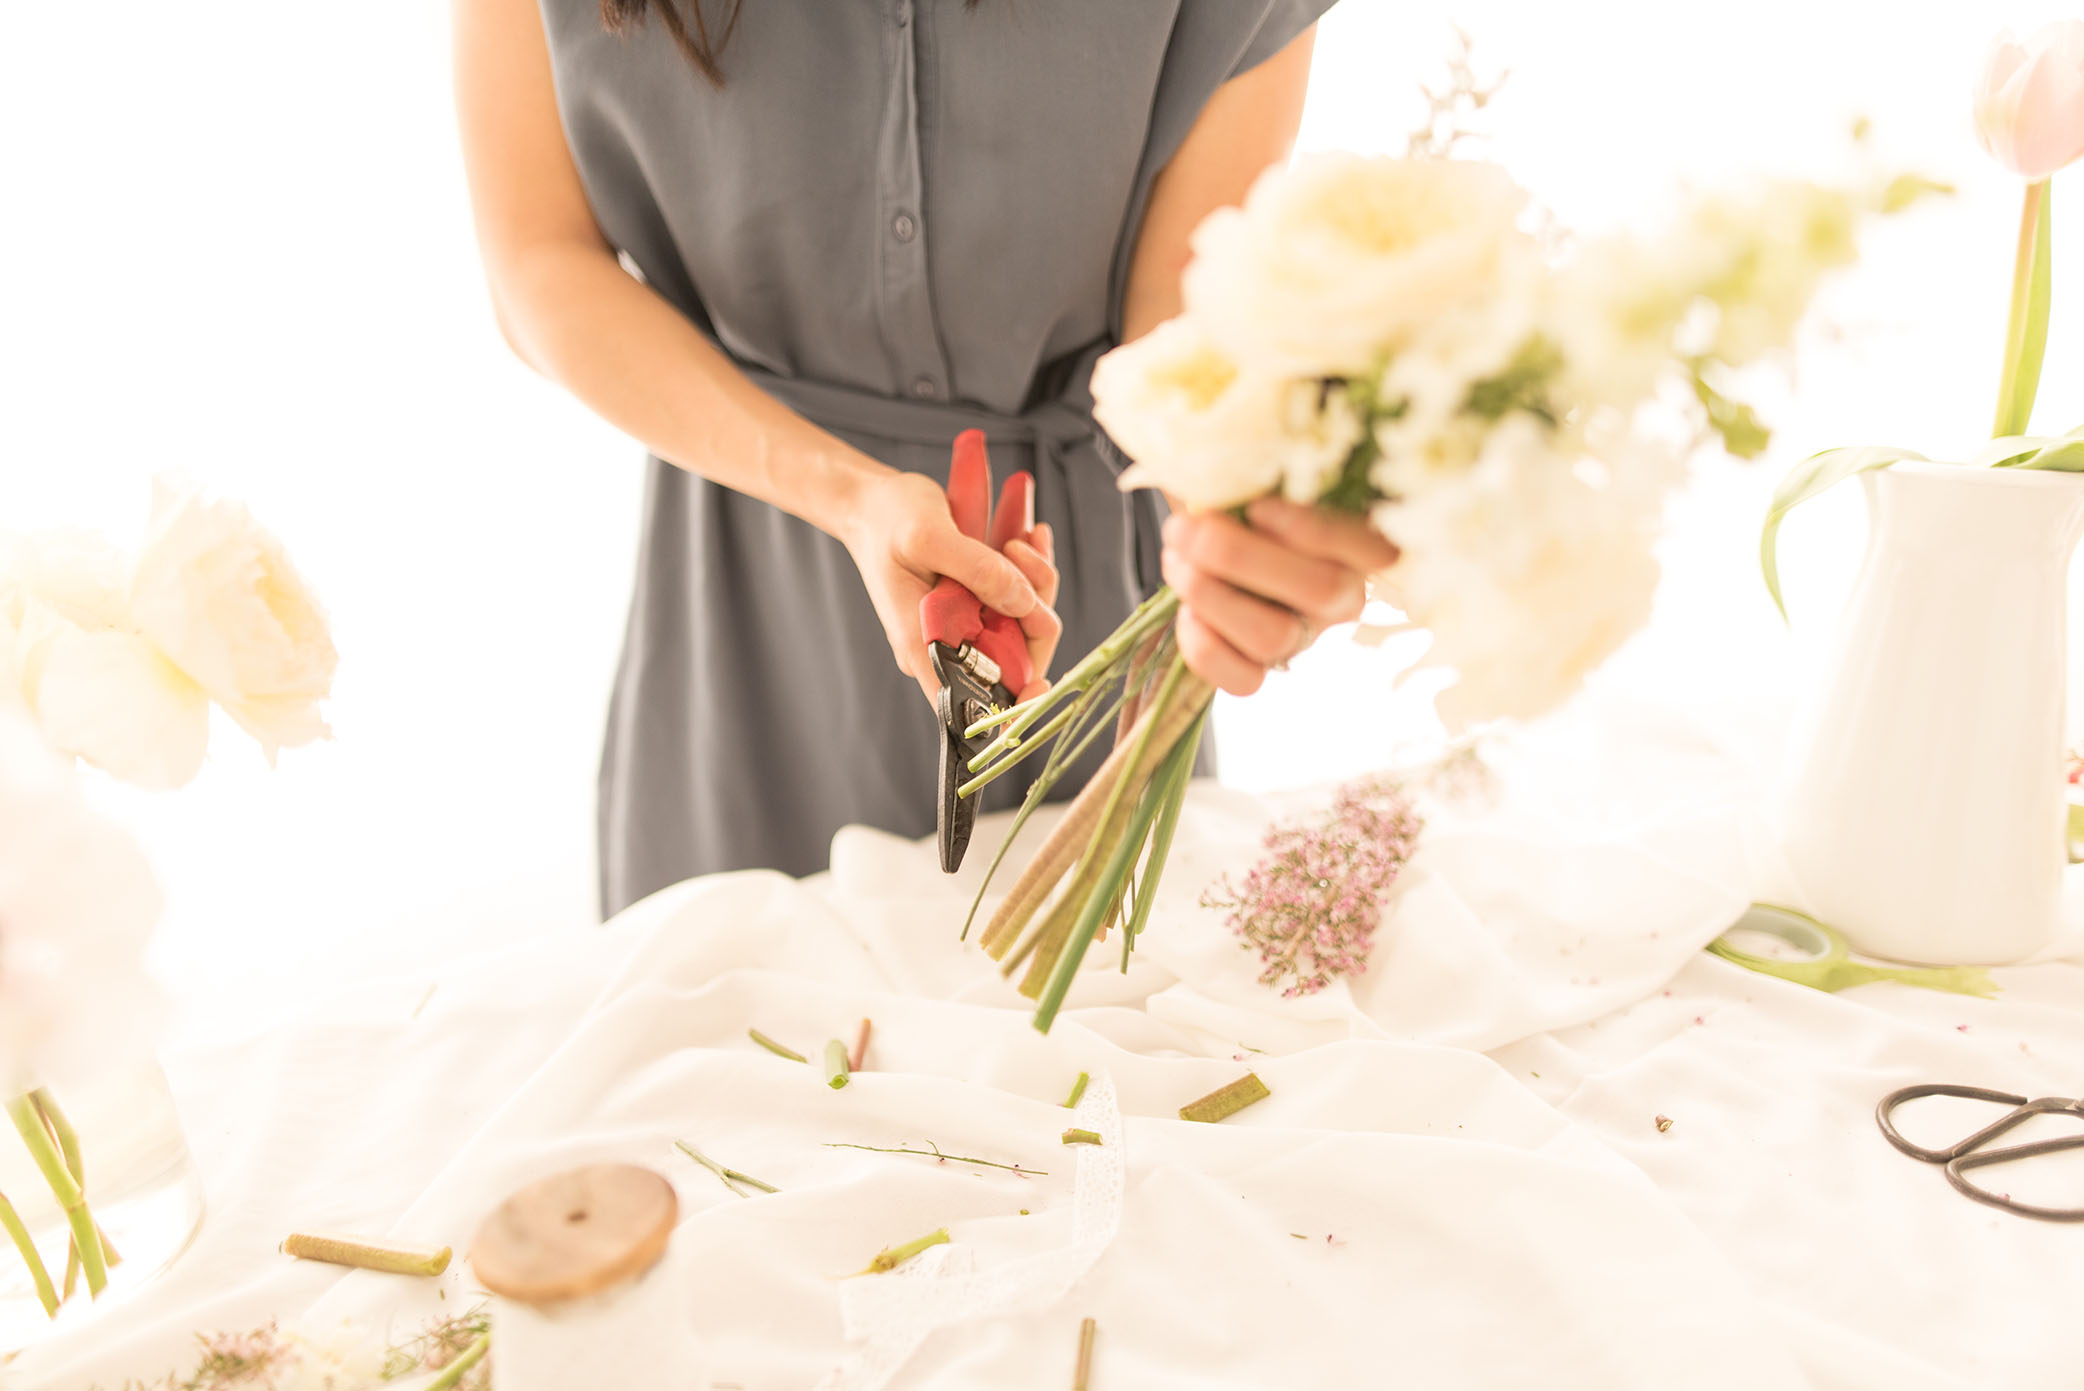 A woman trims the stems of flowers. 